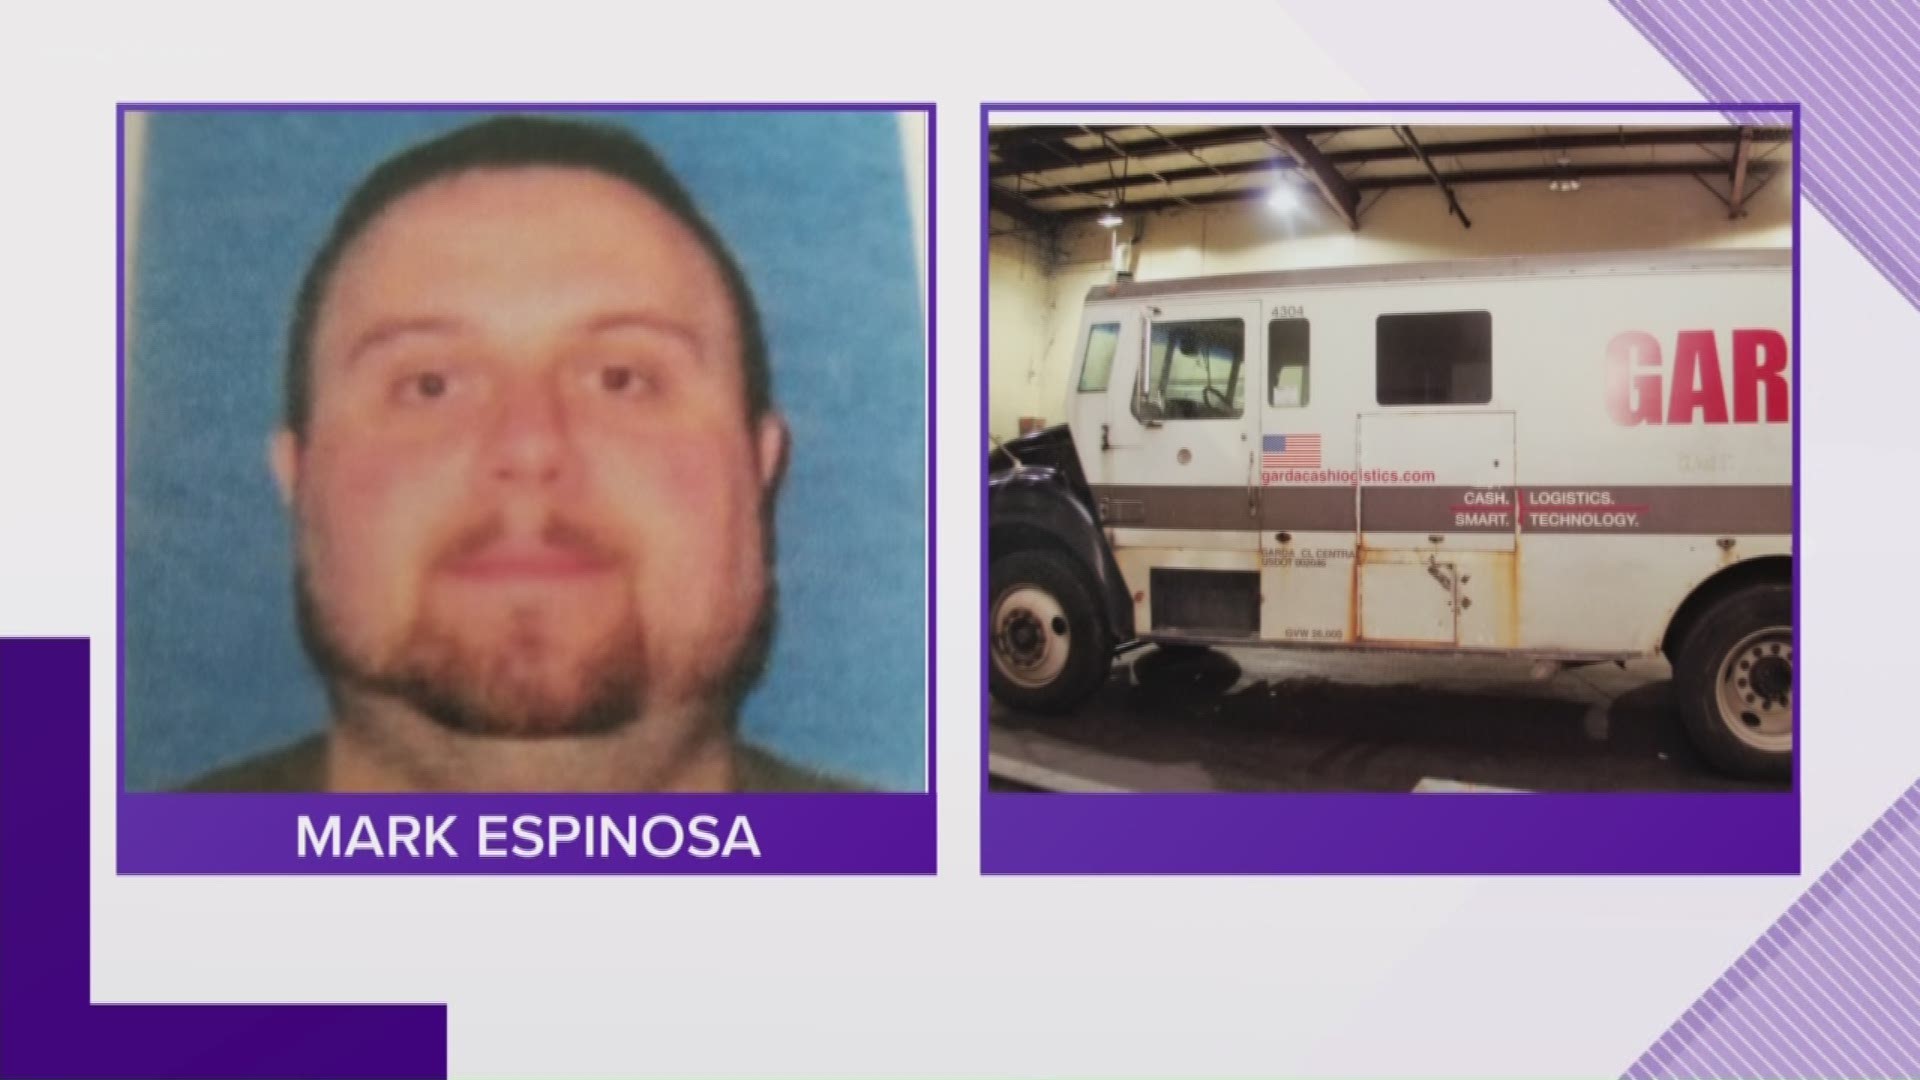 Missing armored truck driver Mark Espinosa is nowhere to be found, and neighbors are suspicious.